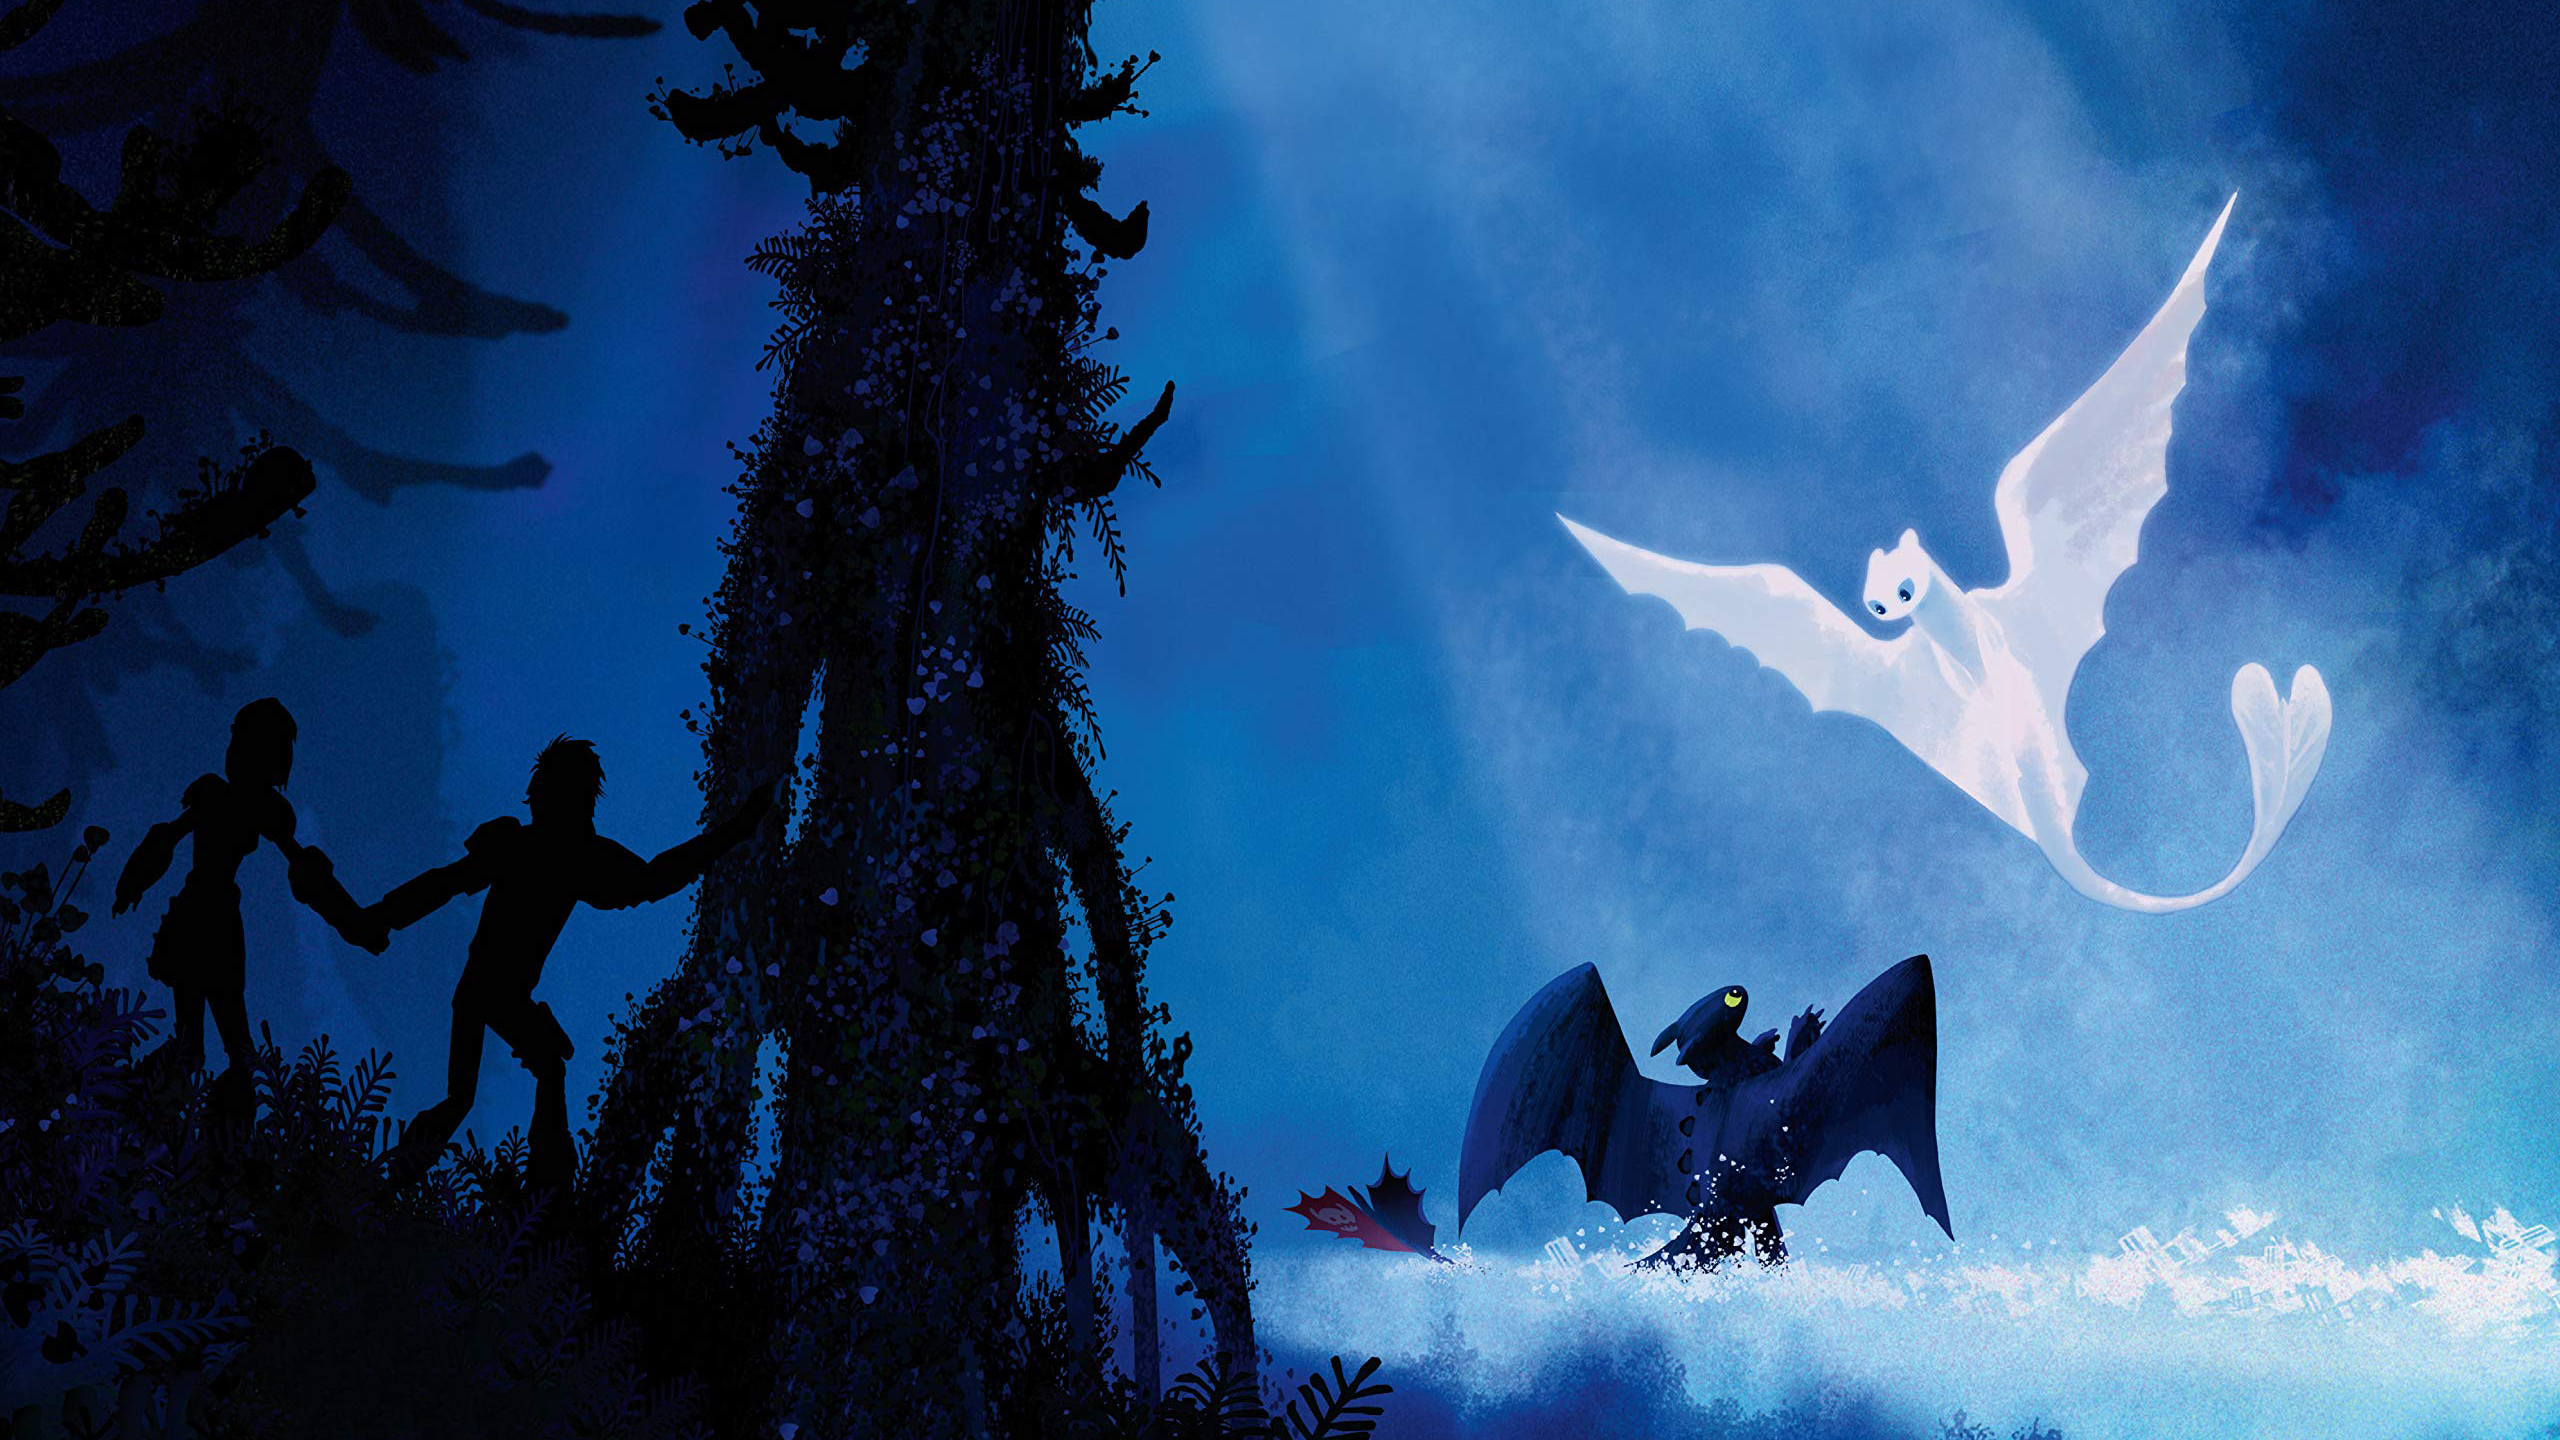 How To Train Your Dragon The Hidden World Widescreen Wallpapers.